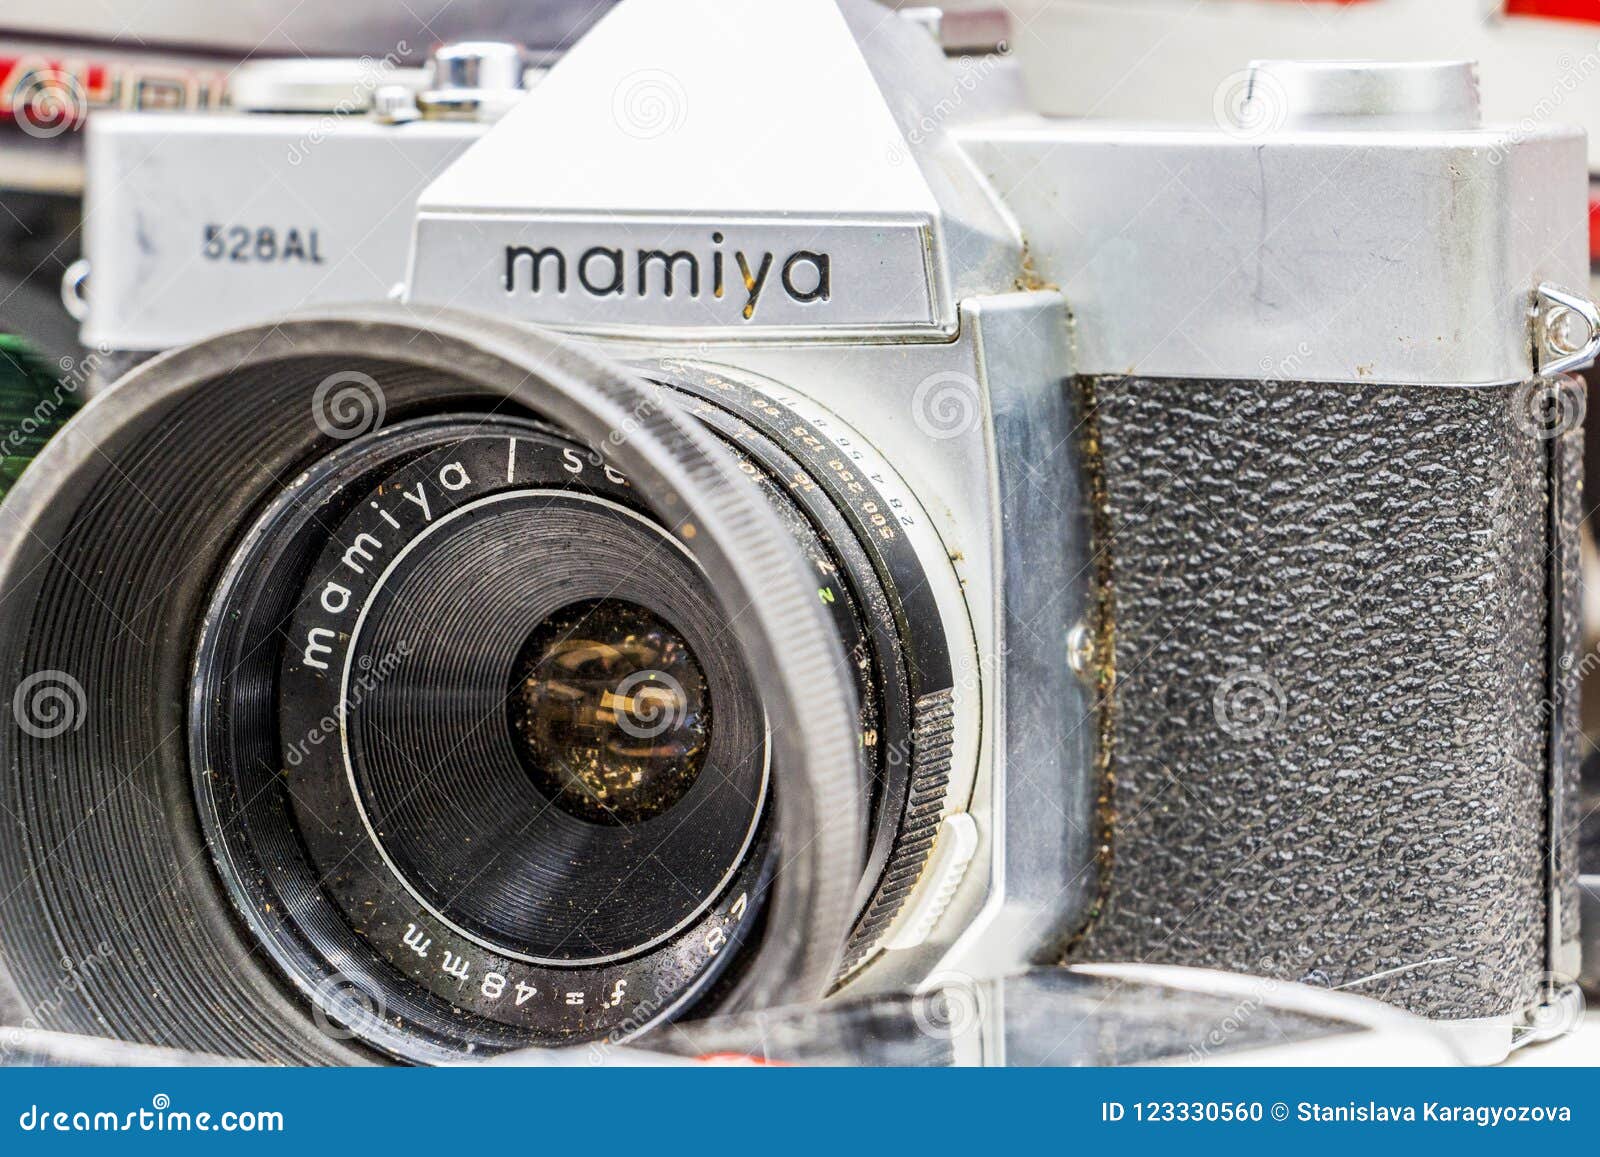 Close-up Of A Second Hand Camera Mamiya 528 AL Exposed For Sale At The Sunday Flea Market In ...